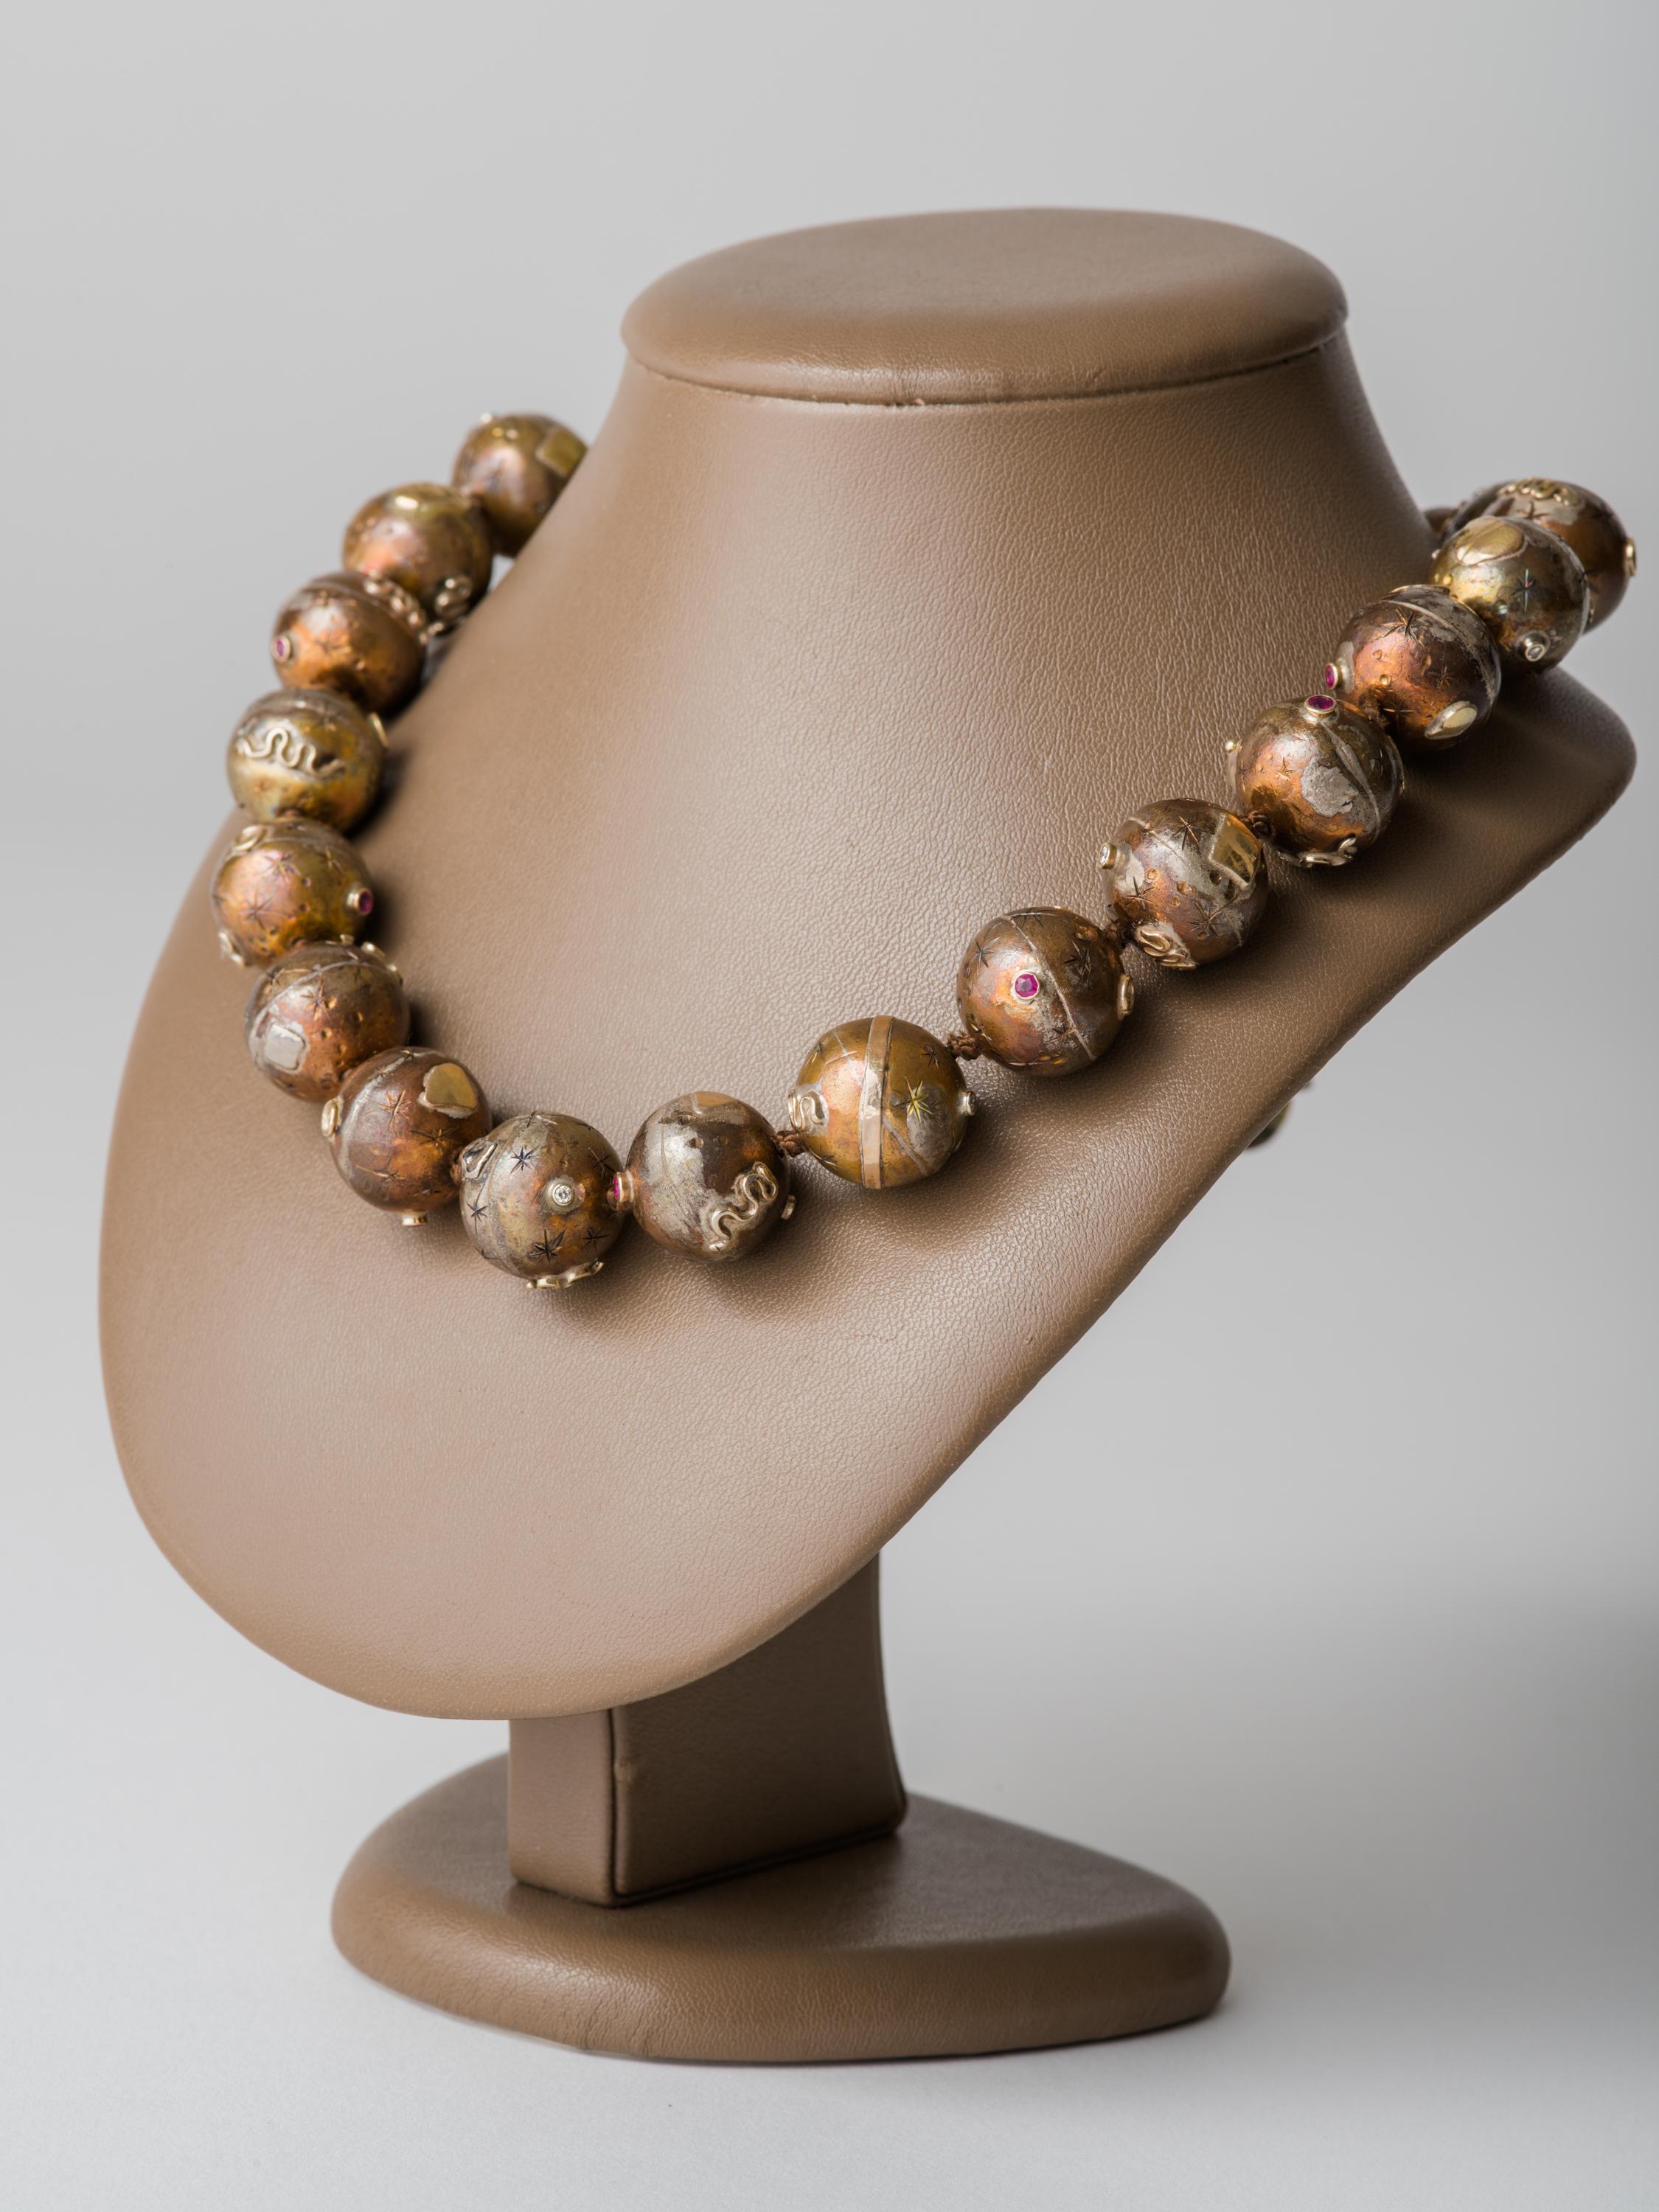 Handcrafted bronze bead necklace with ball catch, keyhole closure and figure eight safety catch by NYC jewelry artist Mark Timmerman. The necklace consists of thirty 17mm bronze beads, each adorned with six elements including fifteen 2 pt. diamonds,